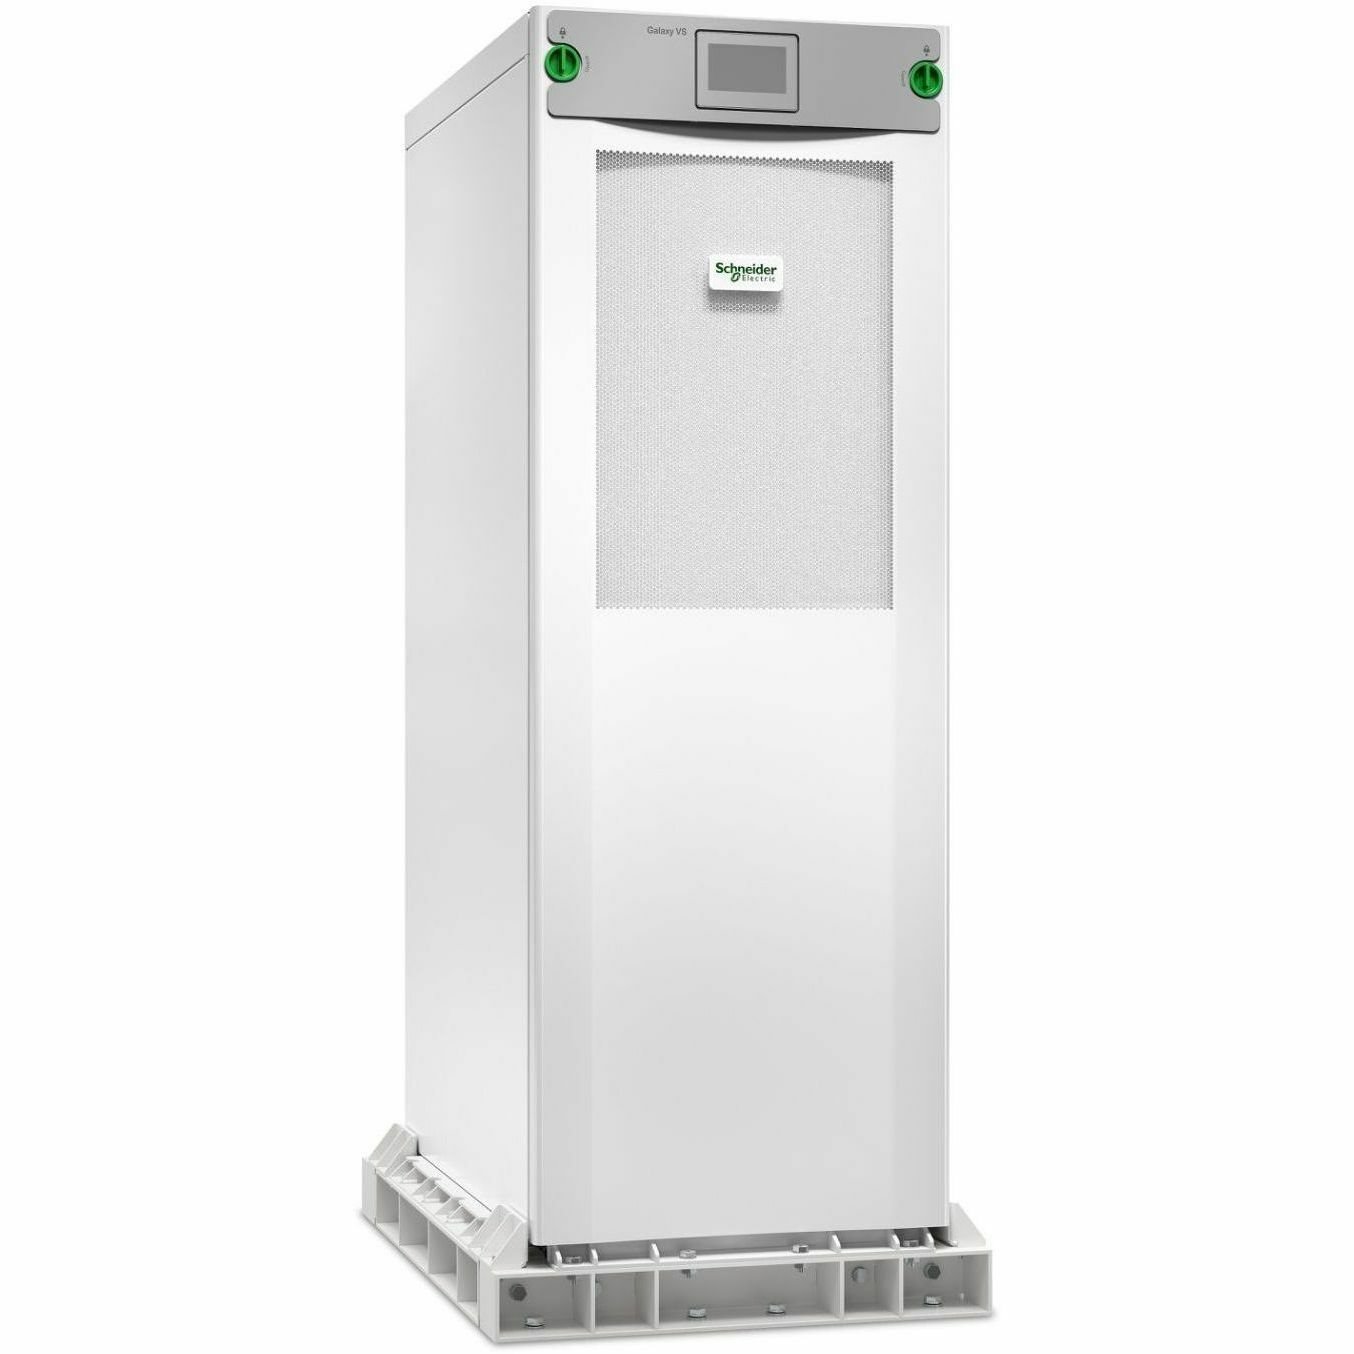 APC by Schneider Electric Galaxy VS Double Conversion Online UPS - 50 kVA/50 kW - Three Phase